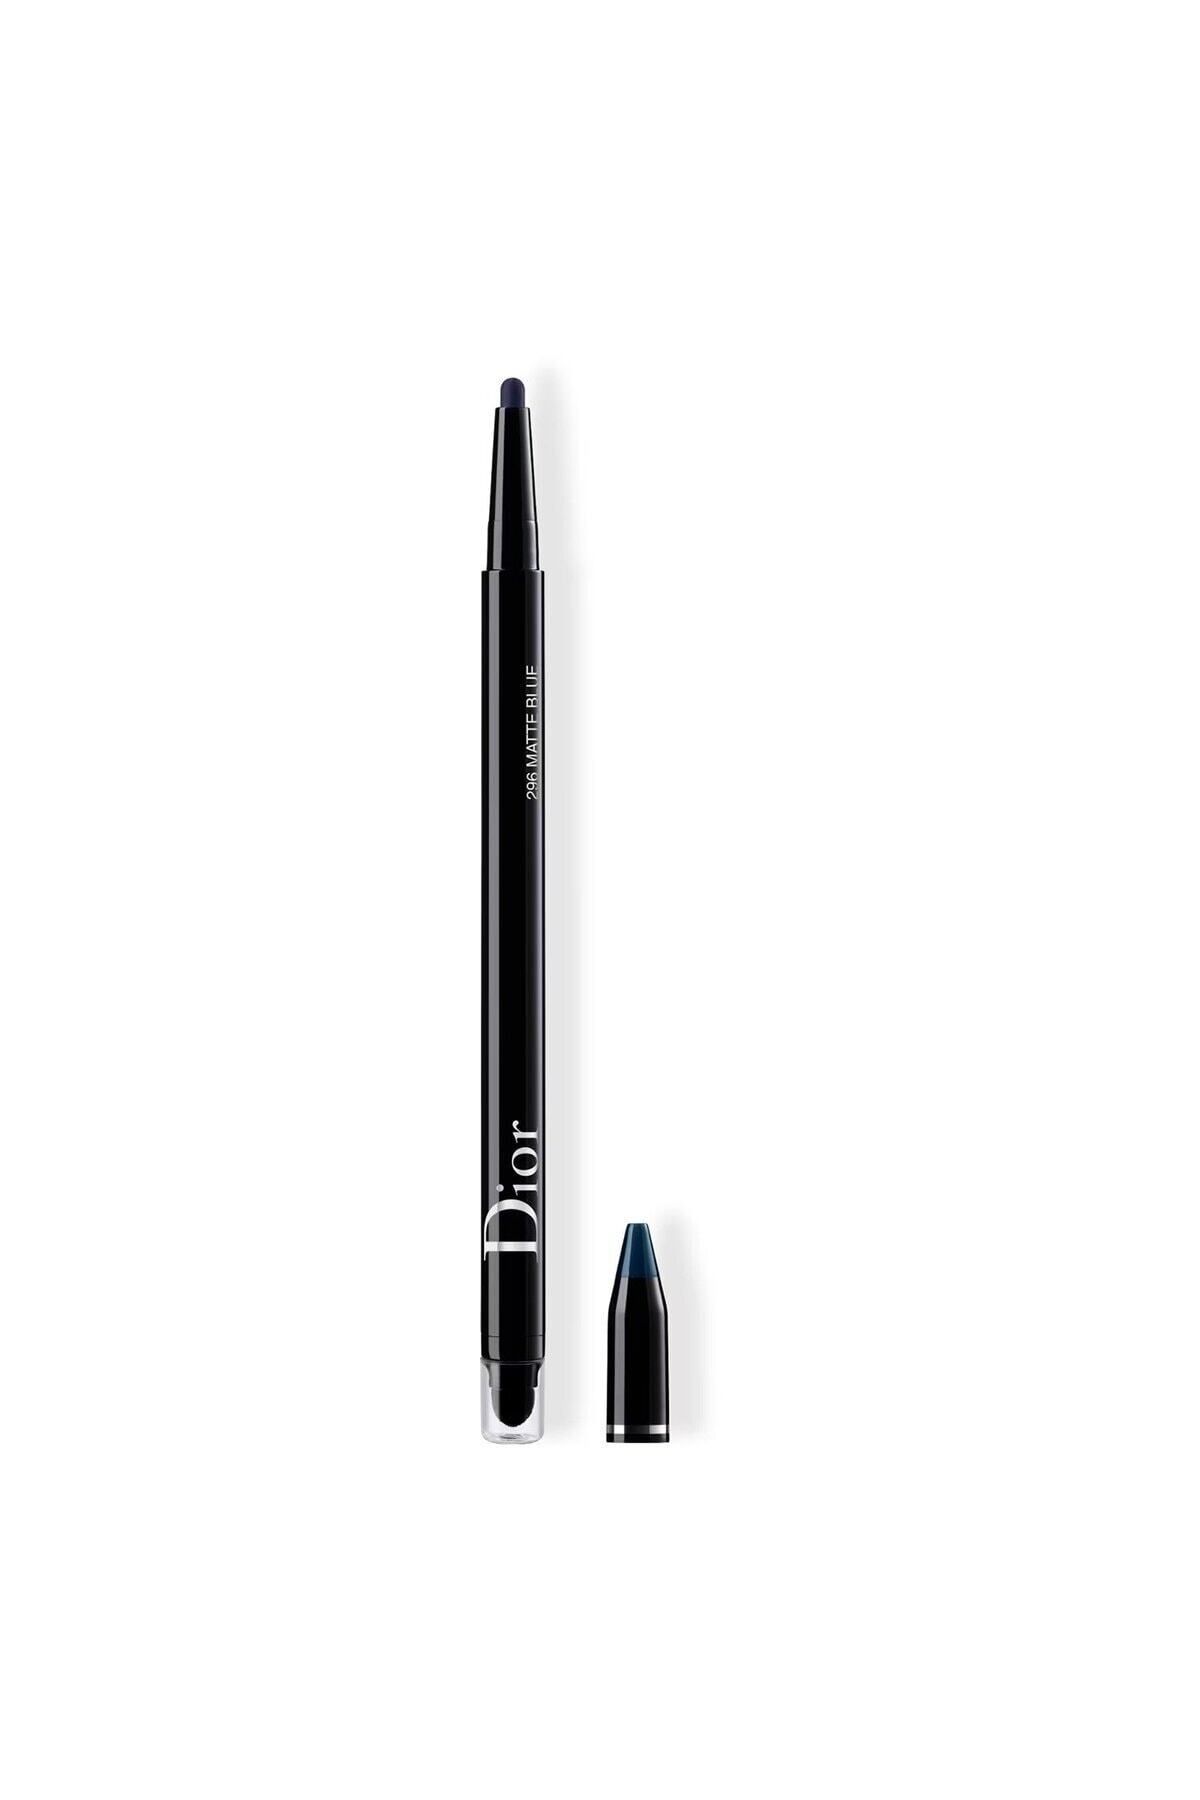 Dior 24H* STYLO WATERPROOF - 24 HOUR LASTİNG AND HİGH INTENSİTY APPEARANCE EYELİNER PSSN1949